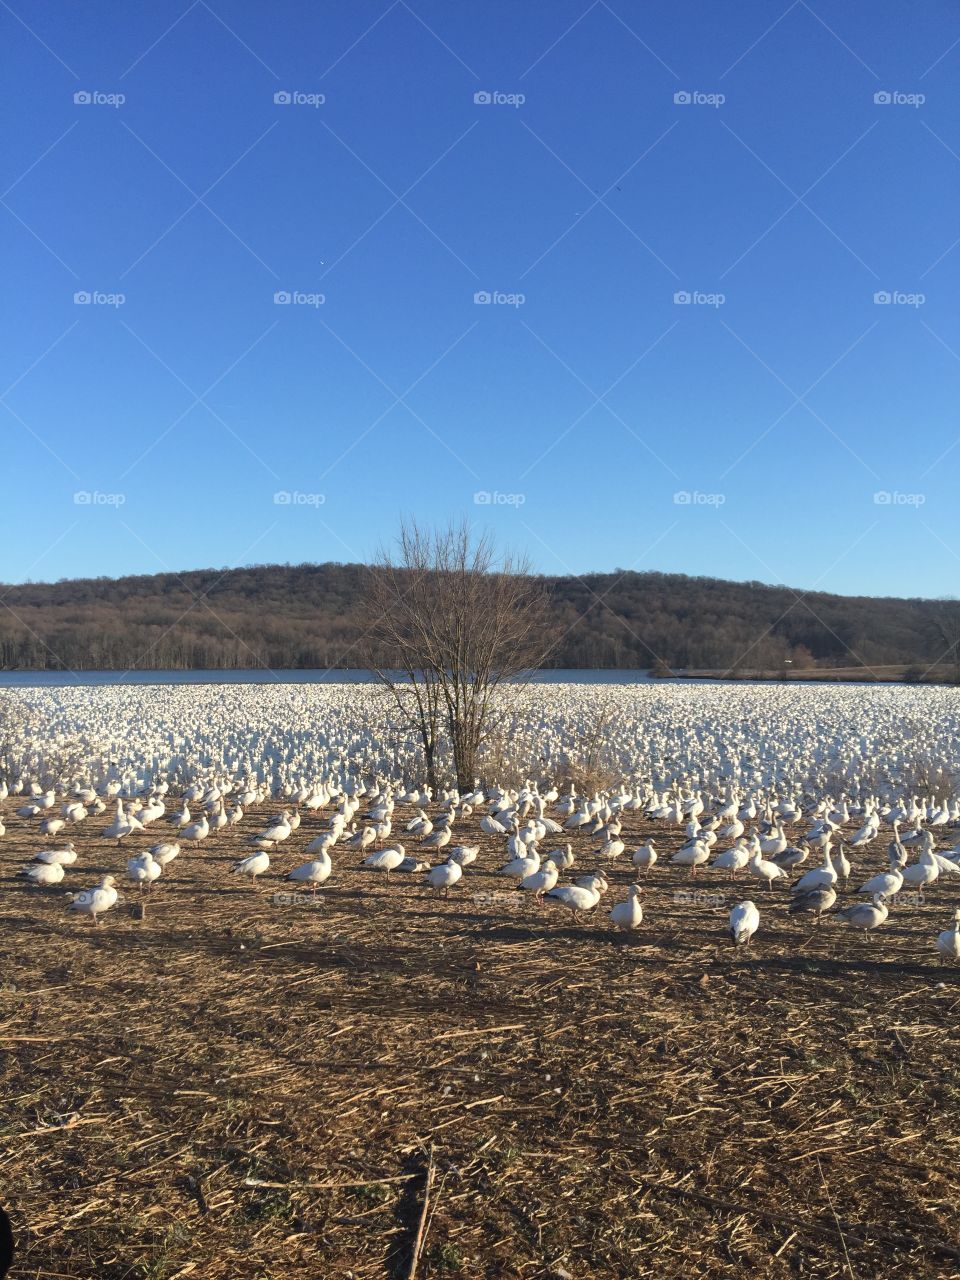 Snow geese what a beautiful sight looks like it snowed